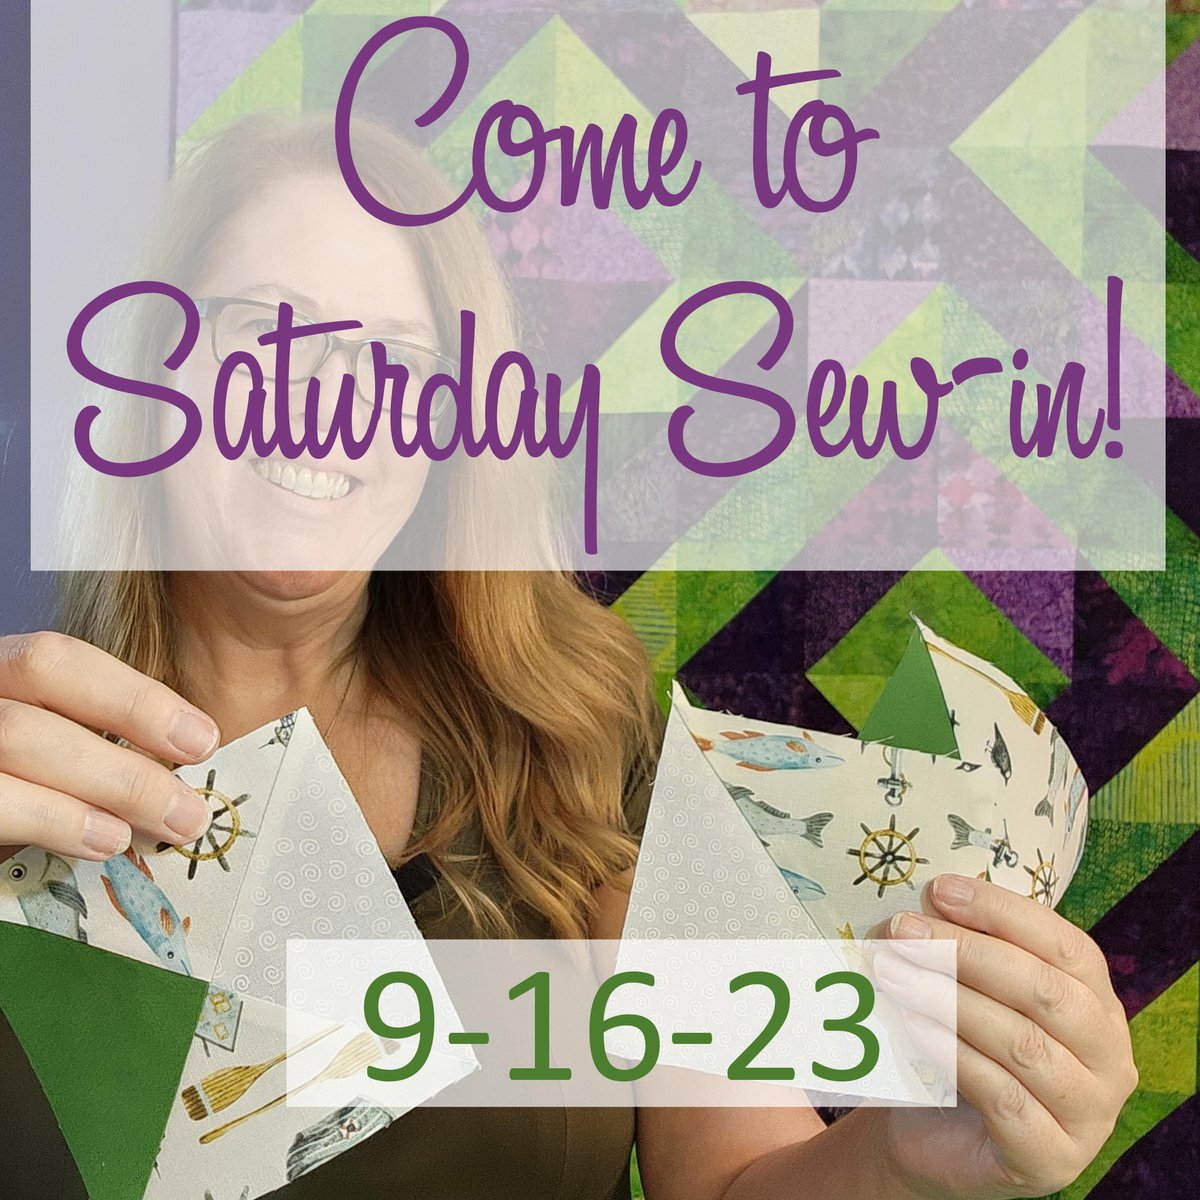 What are you working on? Today I'm recording some videos for an upcoming quilt class. ow.ly/oBye50z3dEy #inquiringquilter #saturdaysewin #saturdaysewing